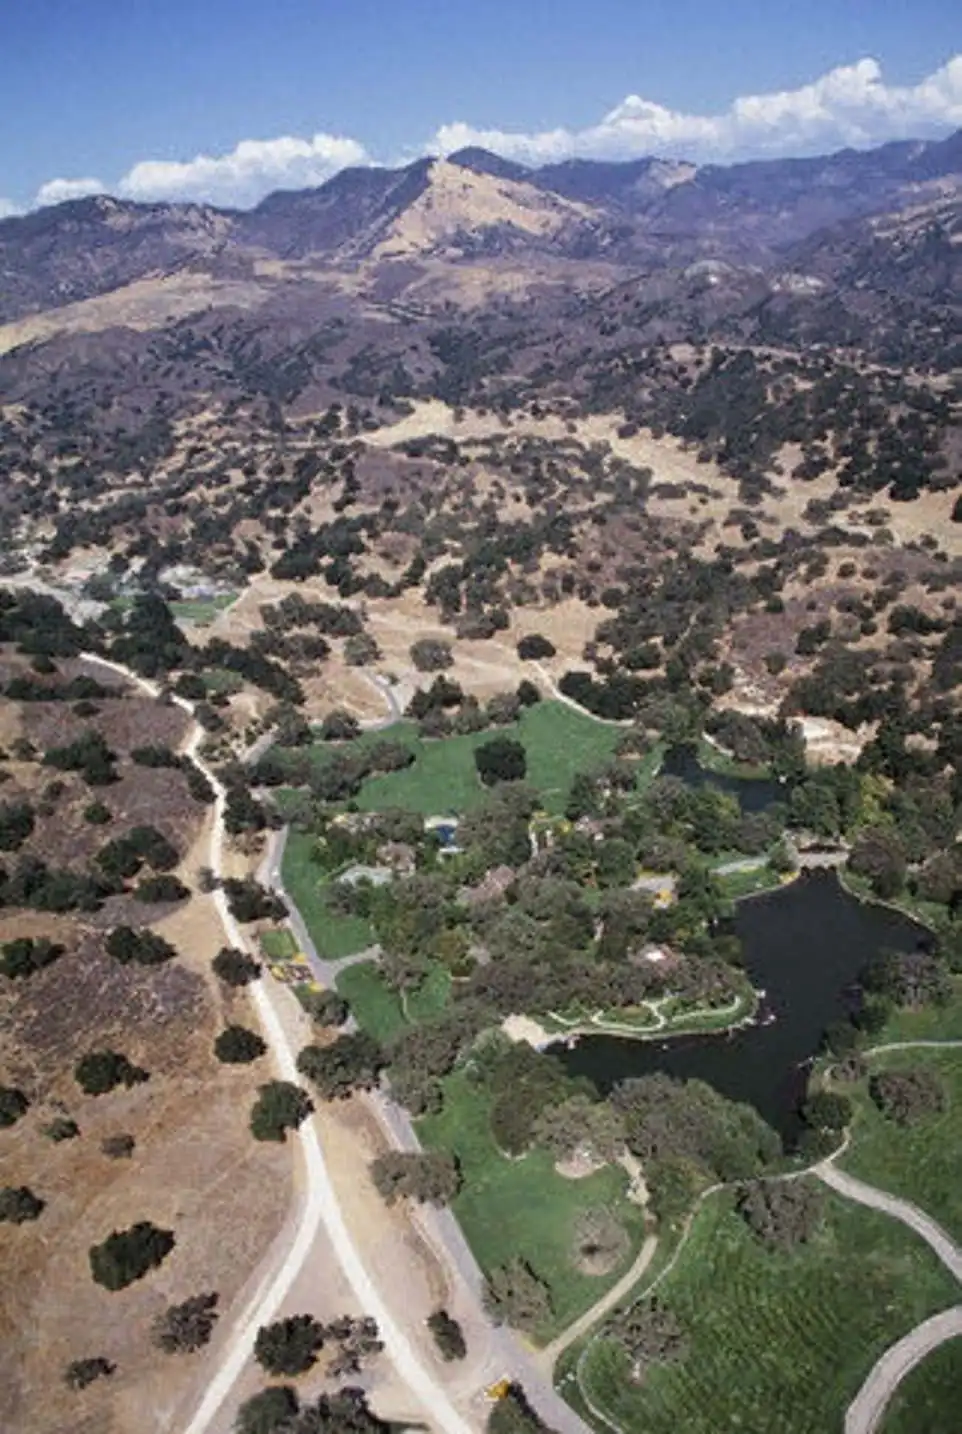 Neverland Ranch was surrounded by mountainous, semi-arid land (pictured 2003)